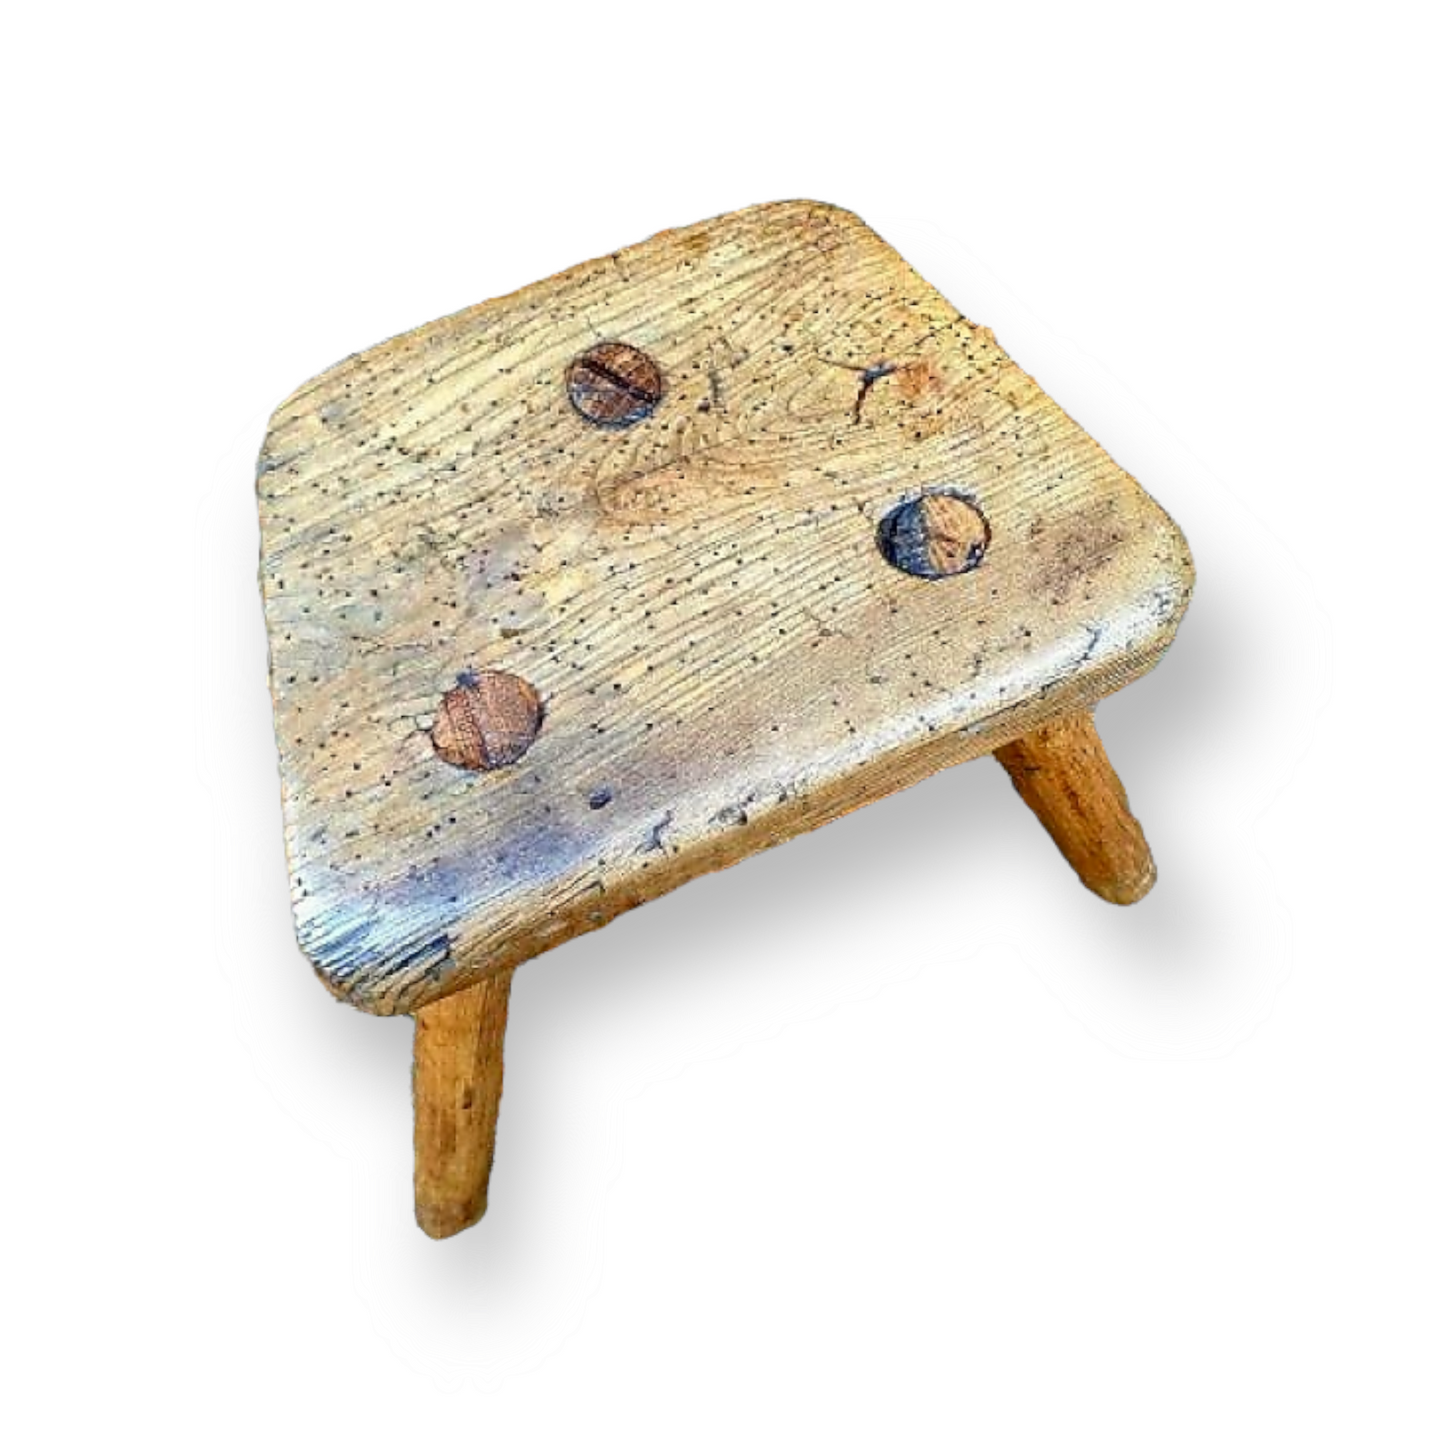 Diminutive Late 18th Century Welsh Antique Milking Stool